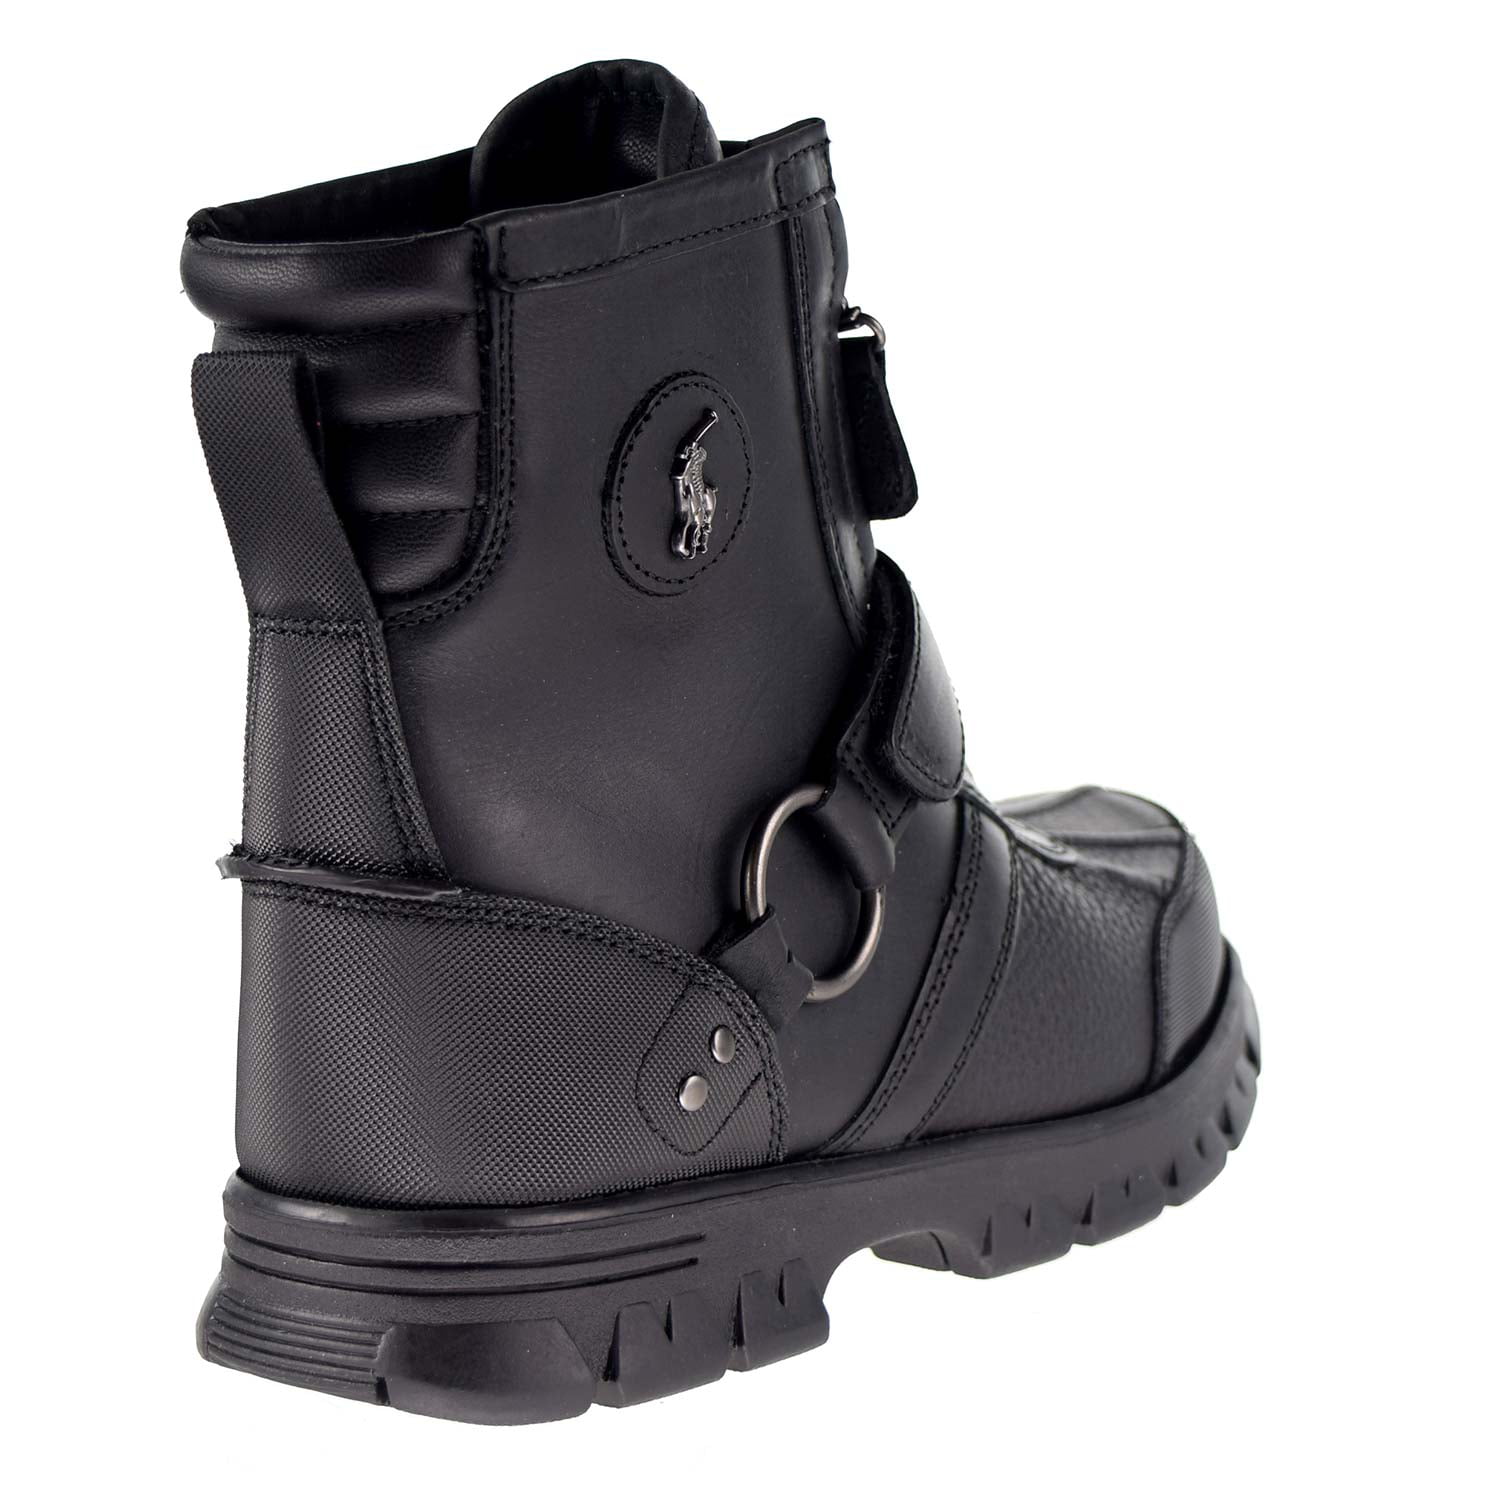 conquest hi boot by polo ralph lauren